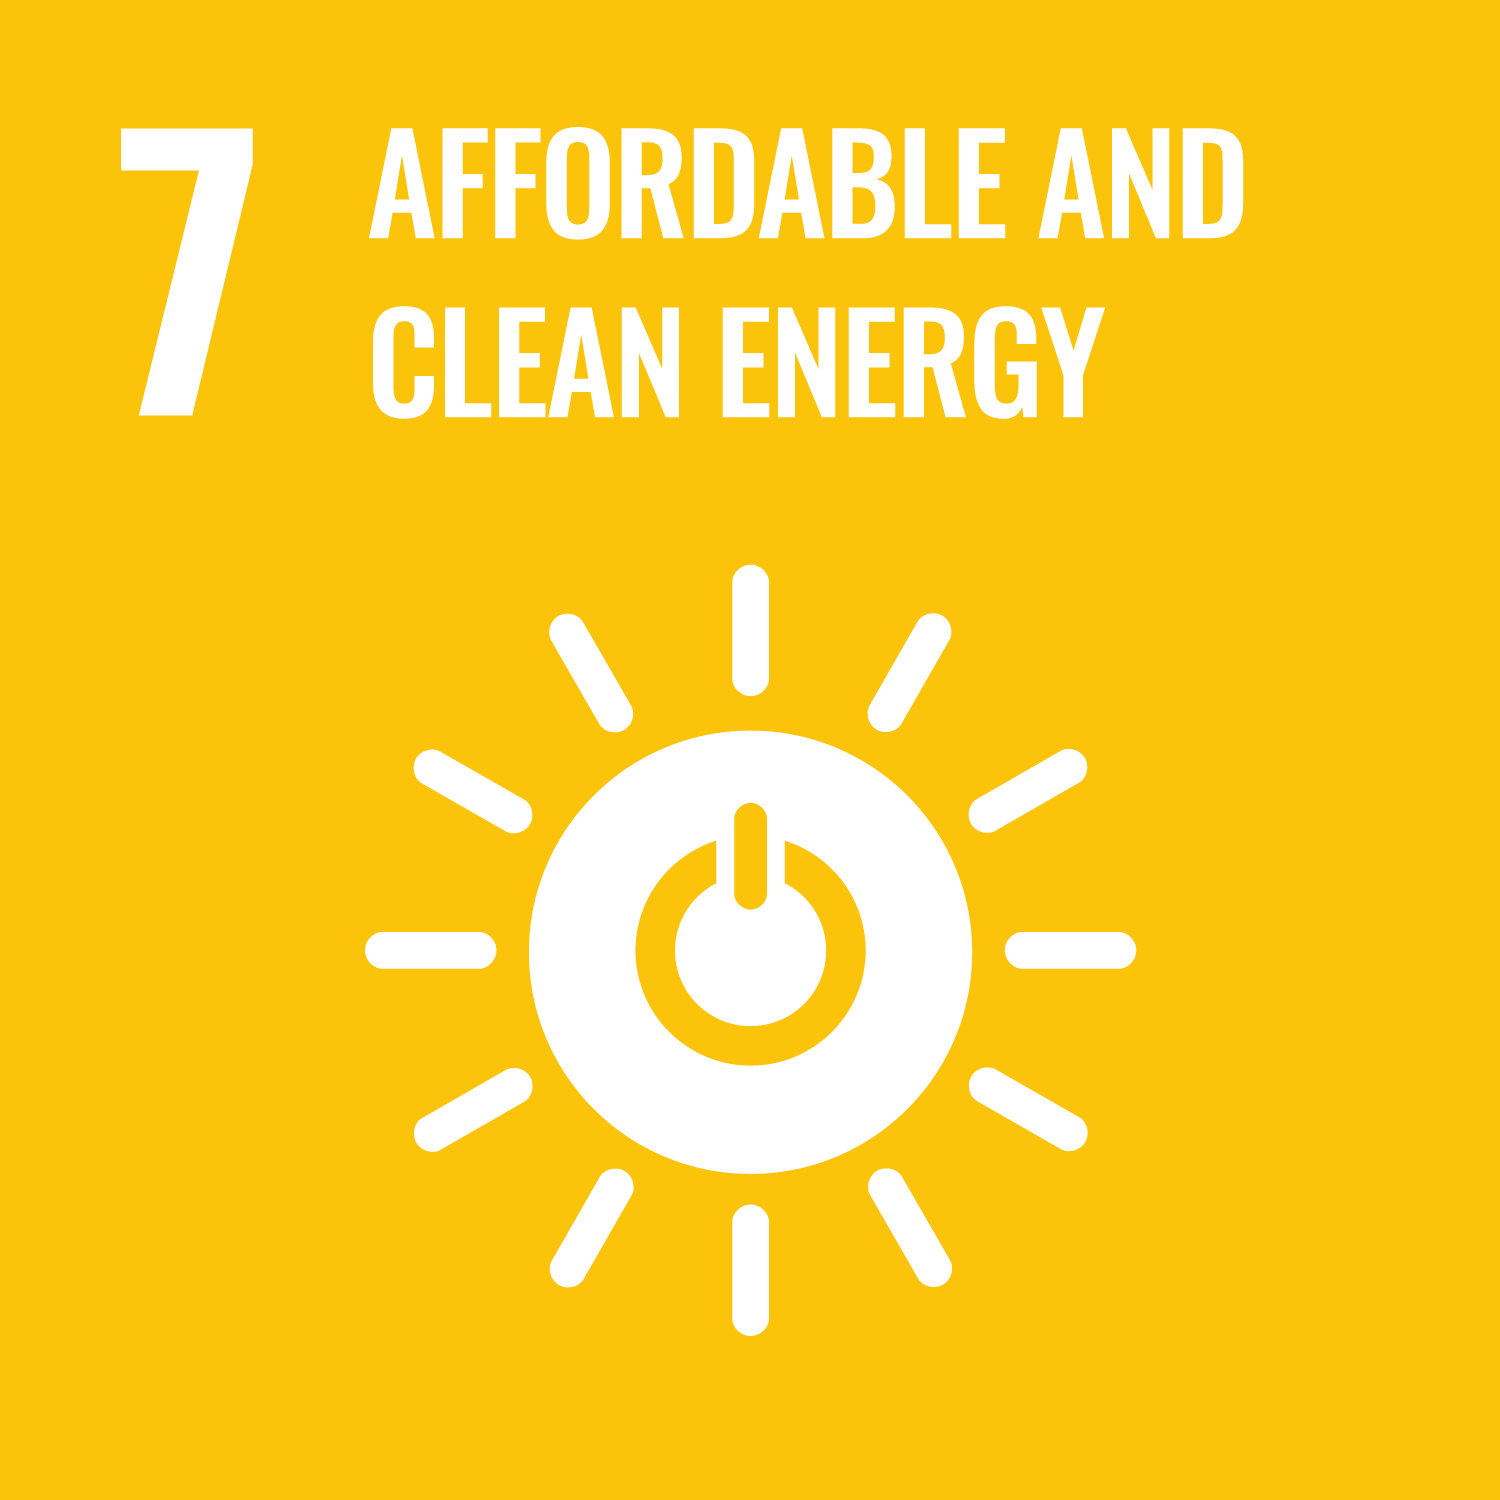 SDGs Goal 7: Affordable and clean energy